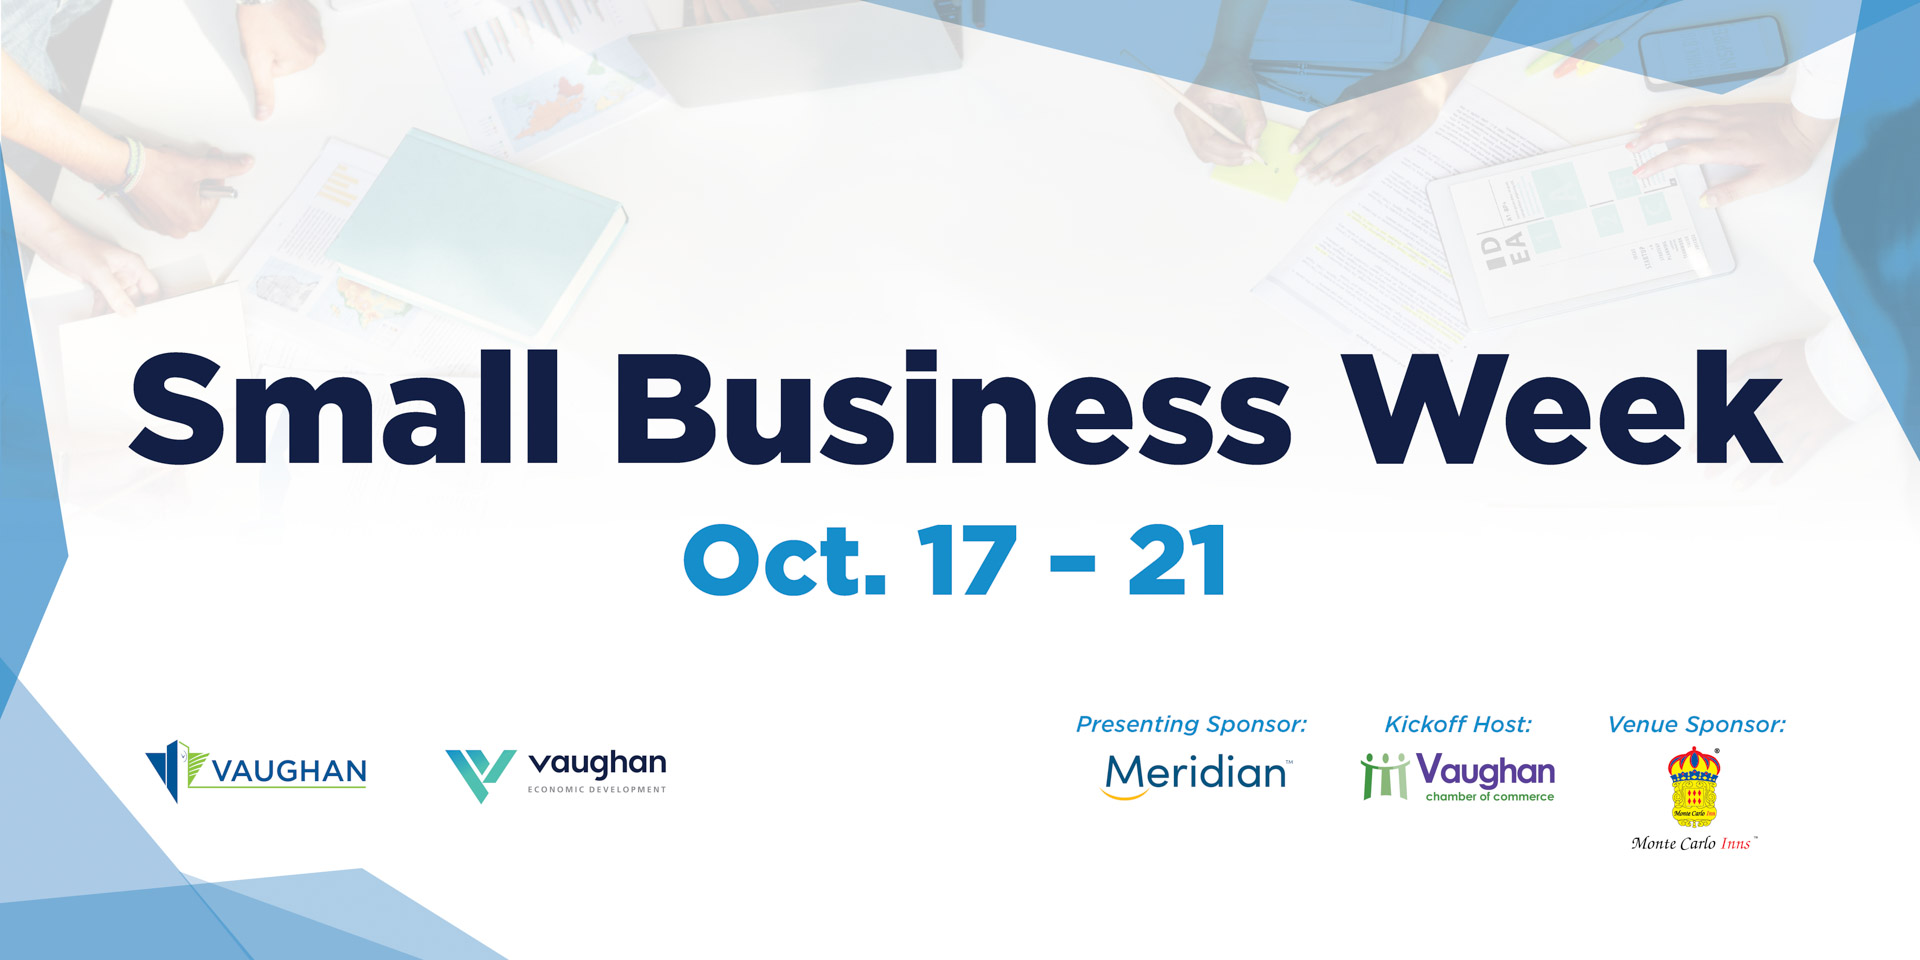 Small Business Week info session